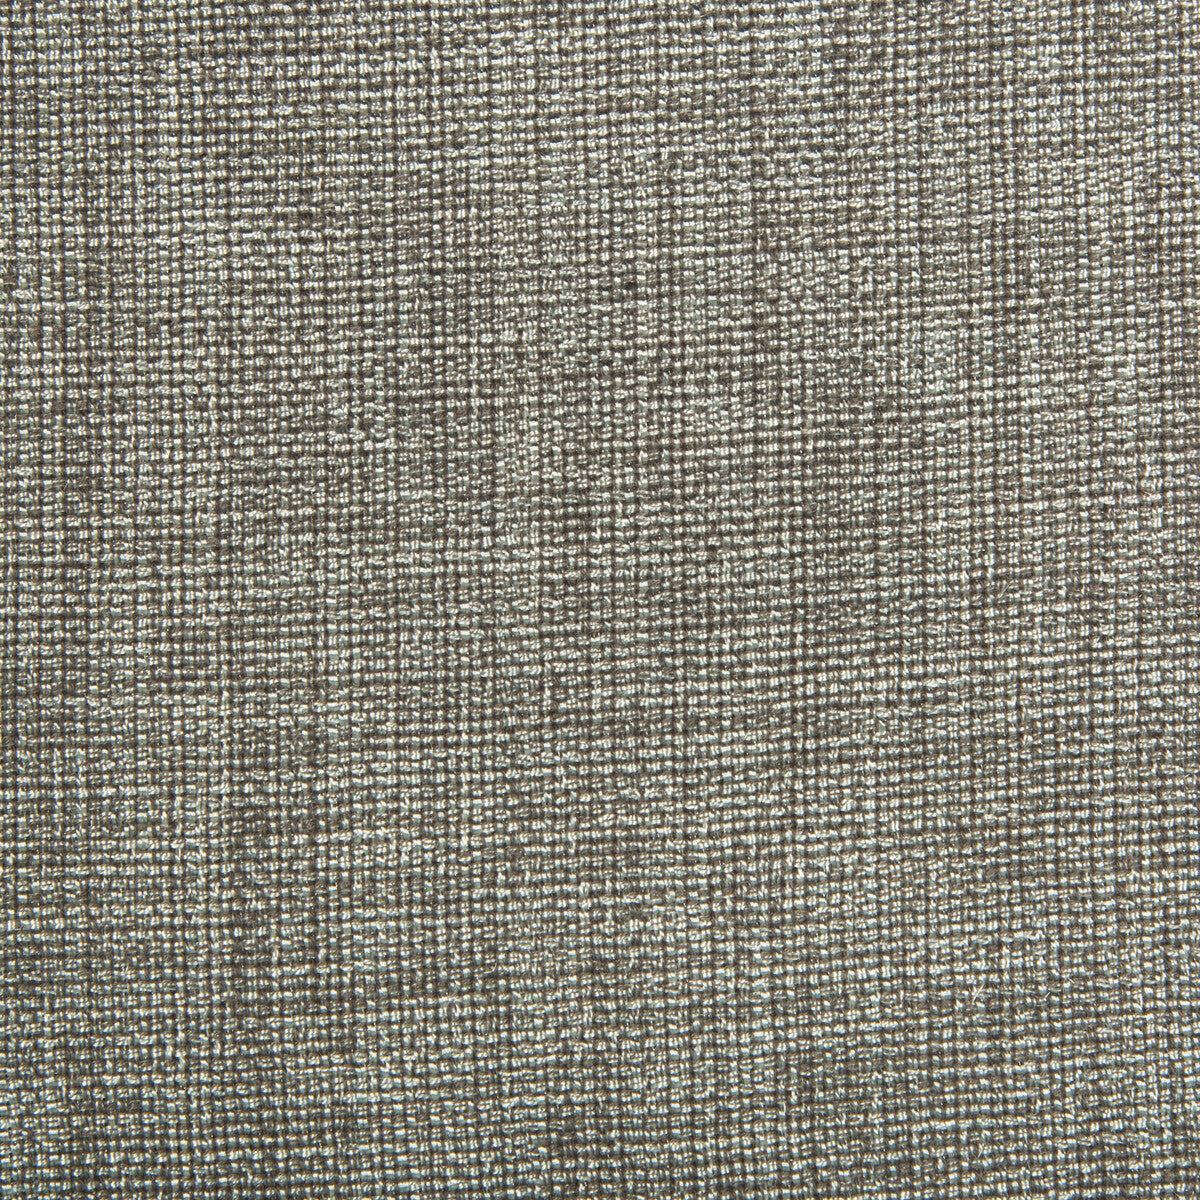 Kravet Contract fabric in 34926-11 color - pattern 34926.11.0 - by Kravet Contract